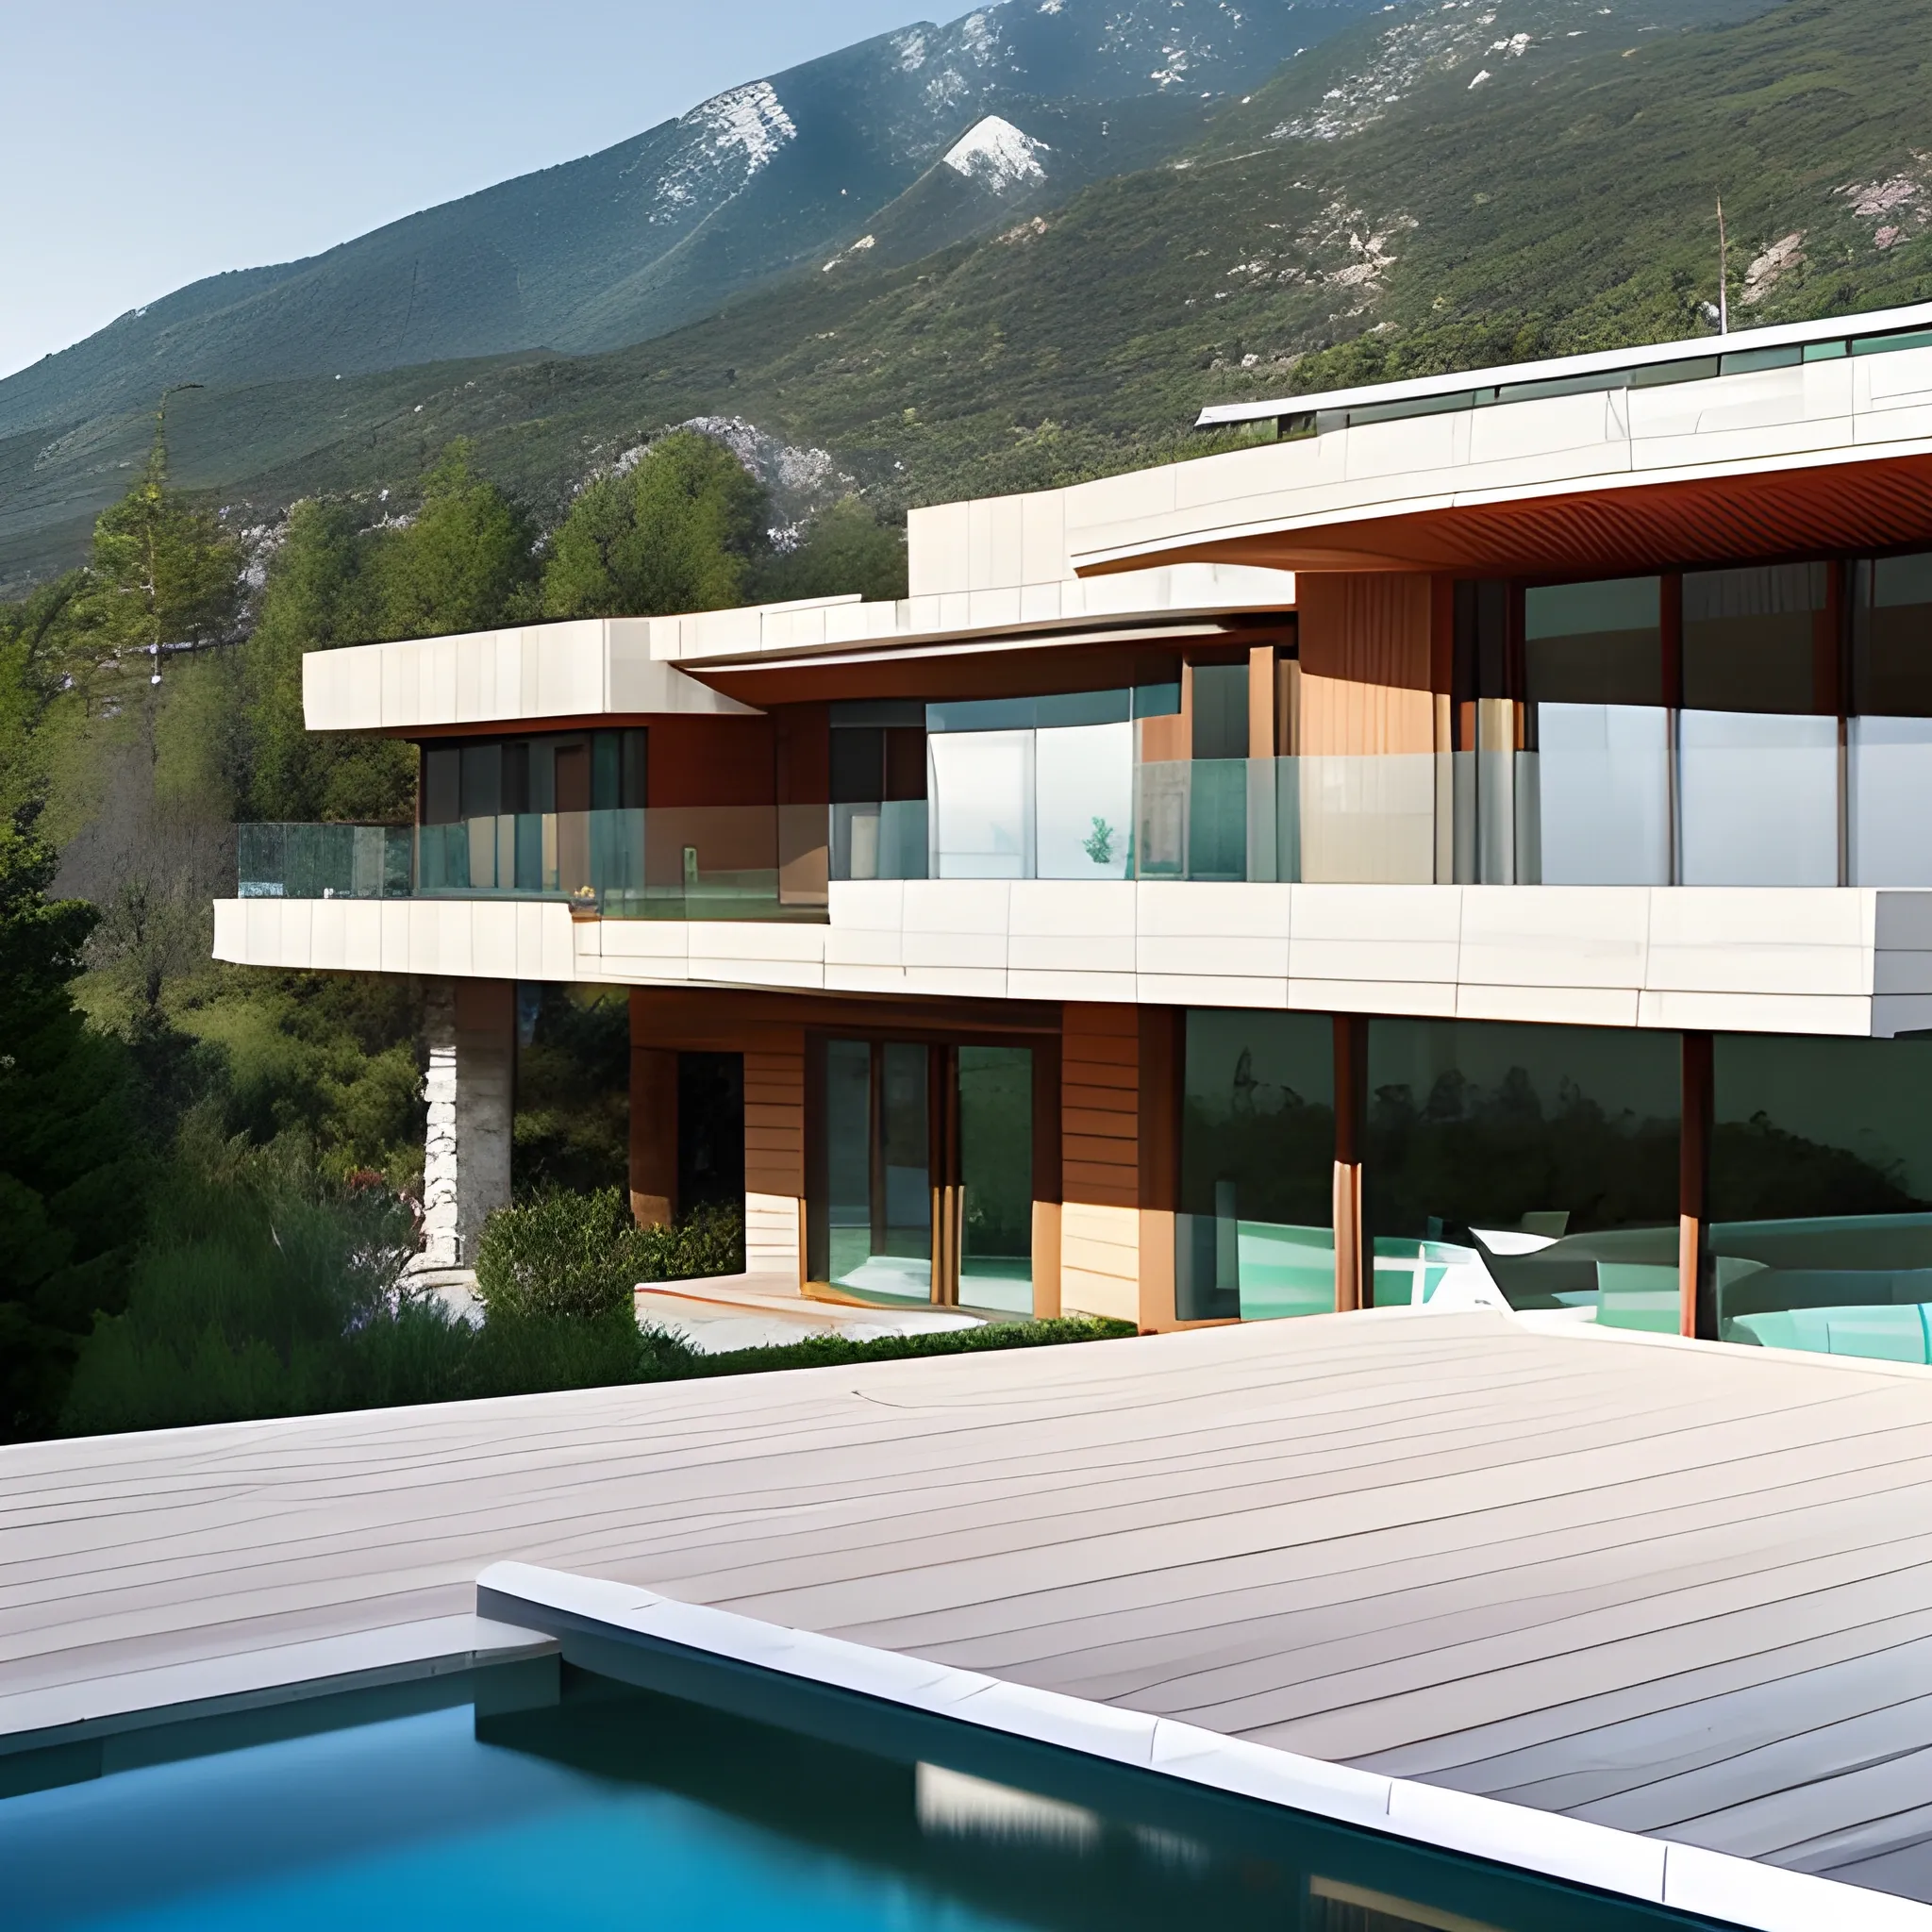 A modern 1-storey house architecture, viewing over a landscape mount Canigou view in the background with a pigne forest in the middle ground with a beautifull terasse and an infinity pool looking over the landscape, sunny day. Frank Lloyd Wright and Zaha Hadid style. 

